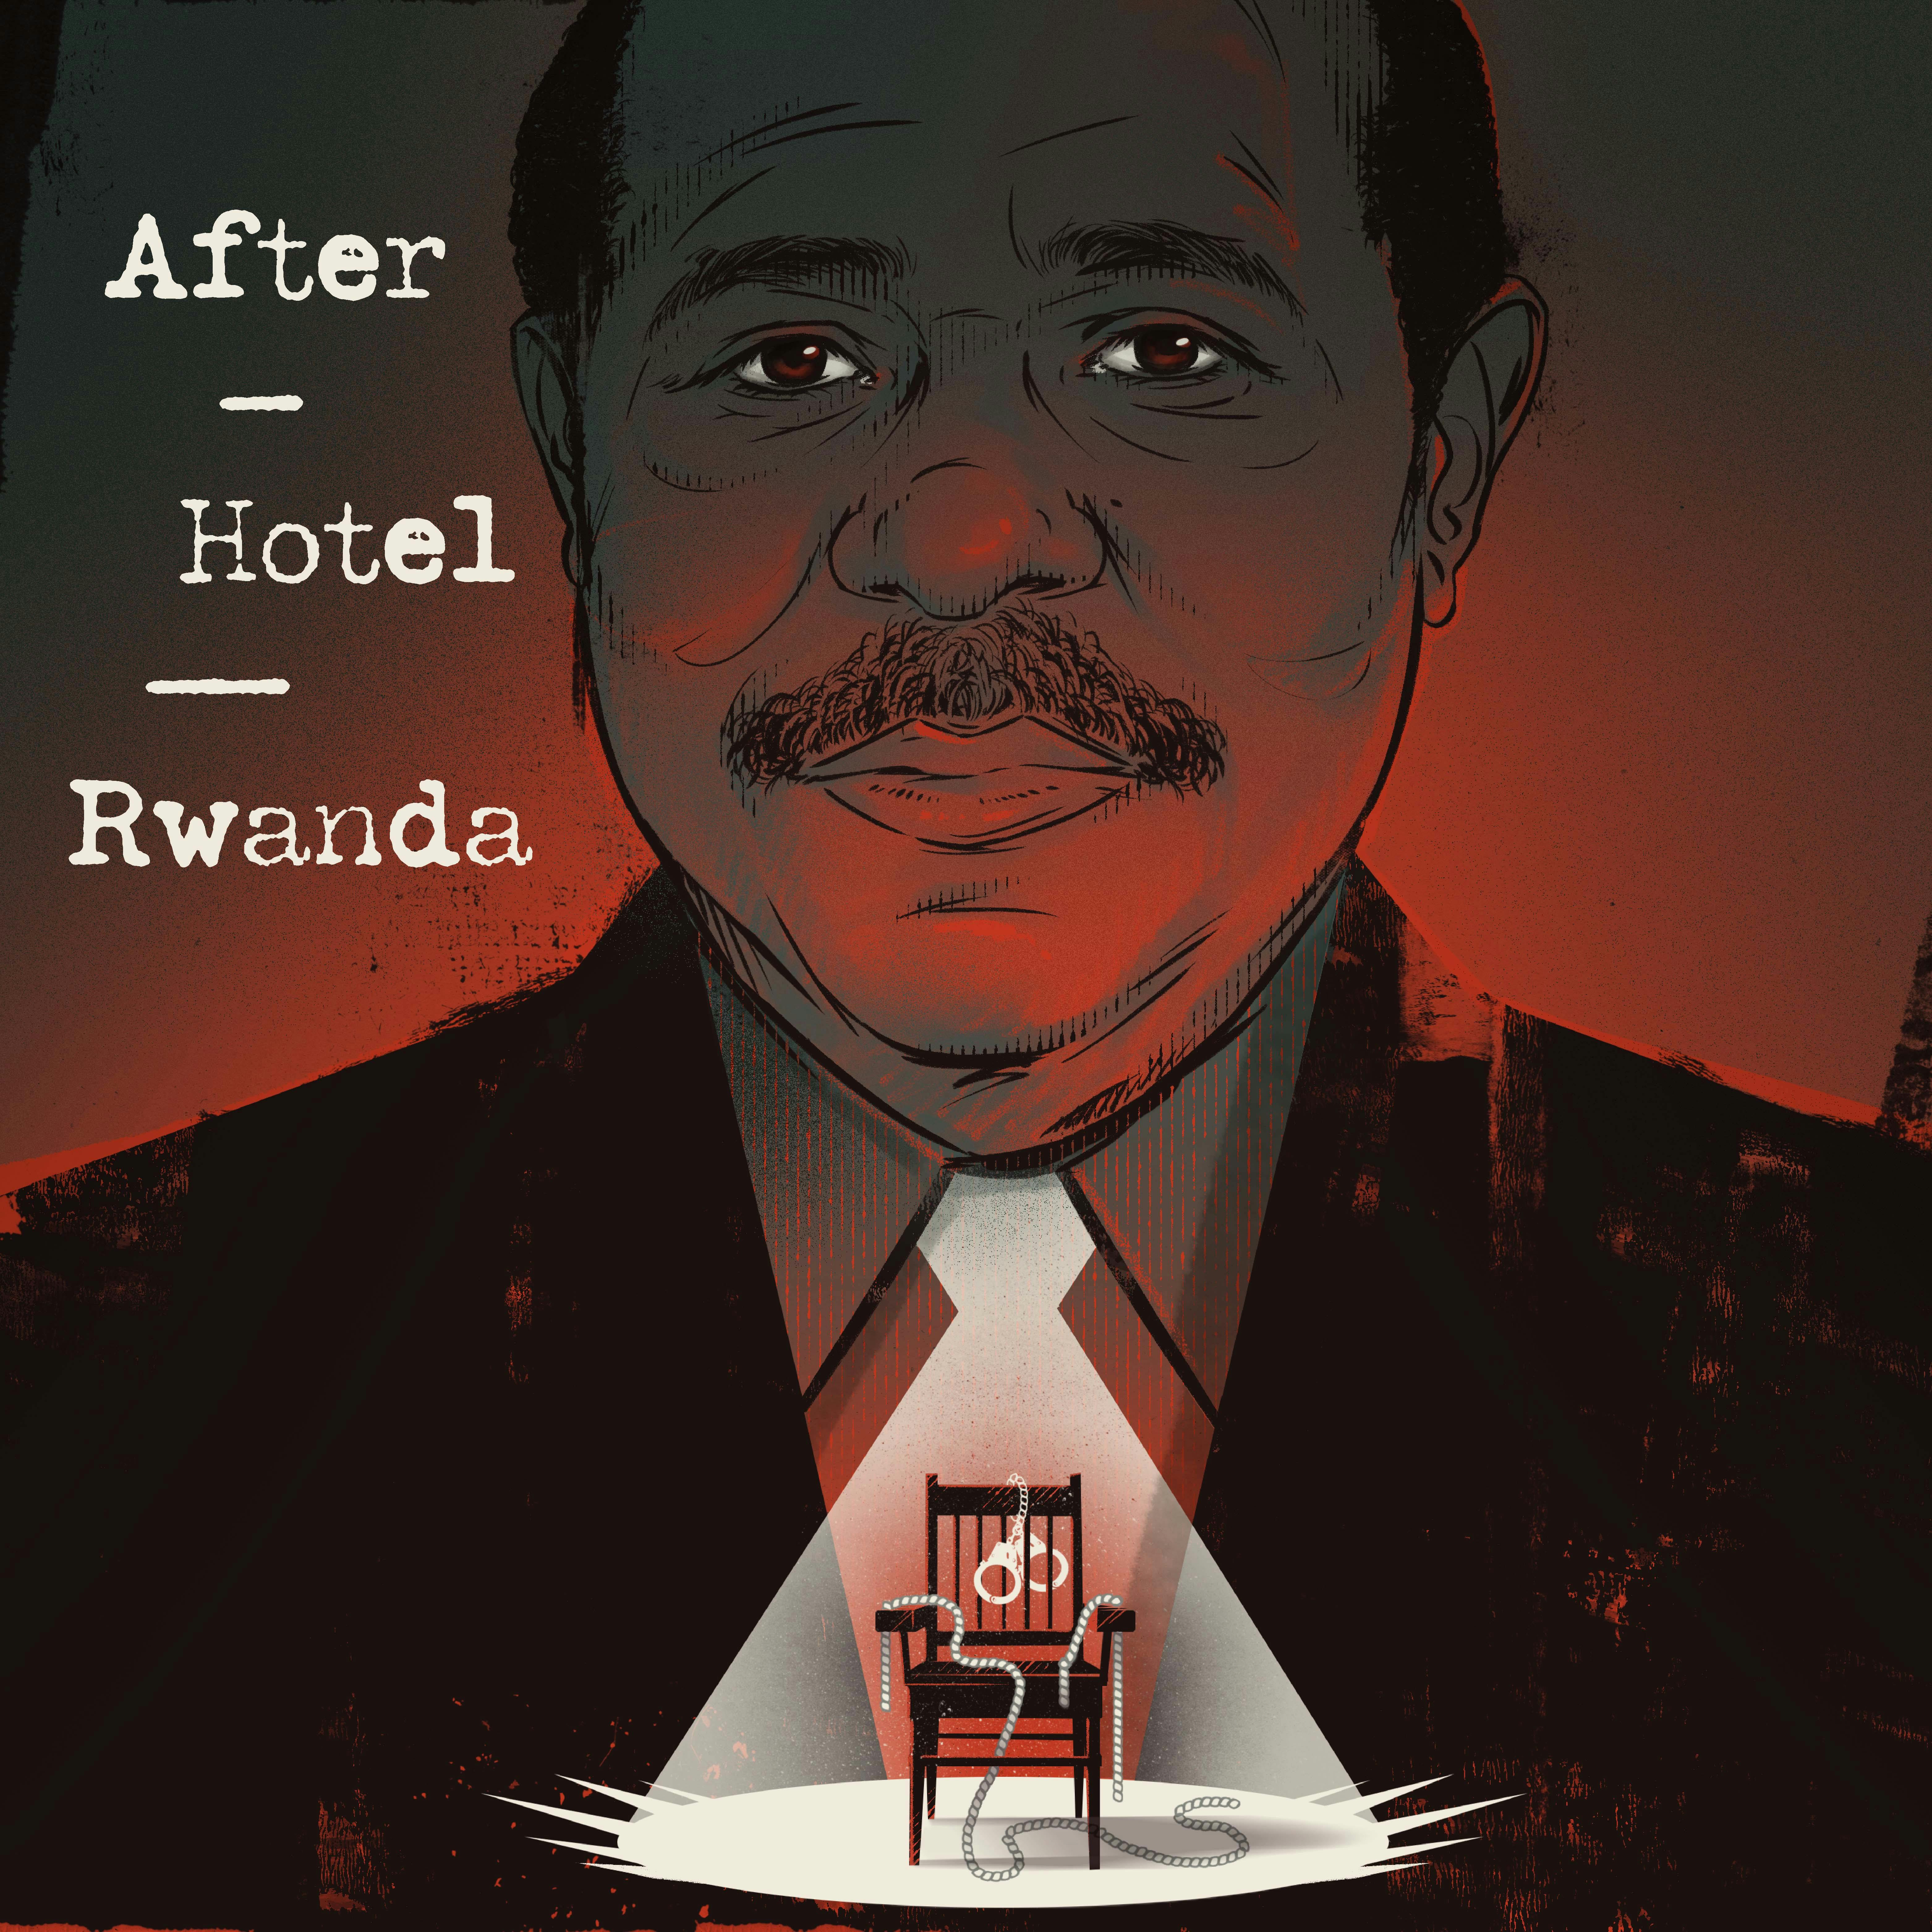 After Hotel Rwanda, Part 3: The Campaign